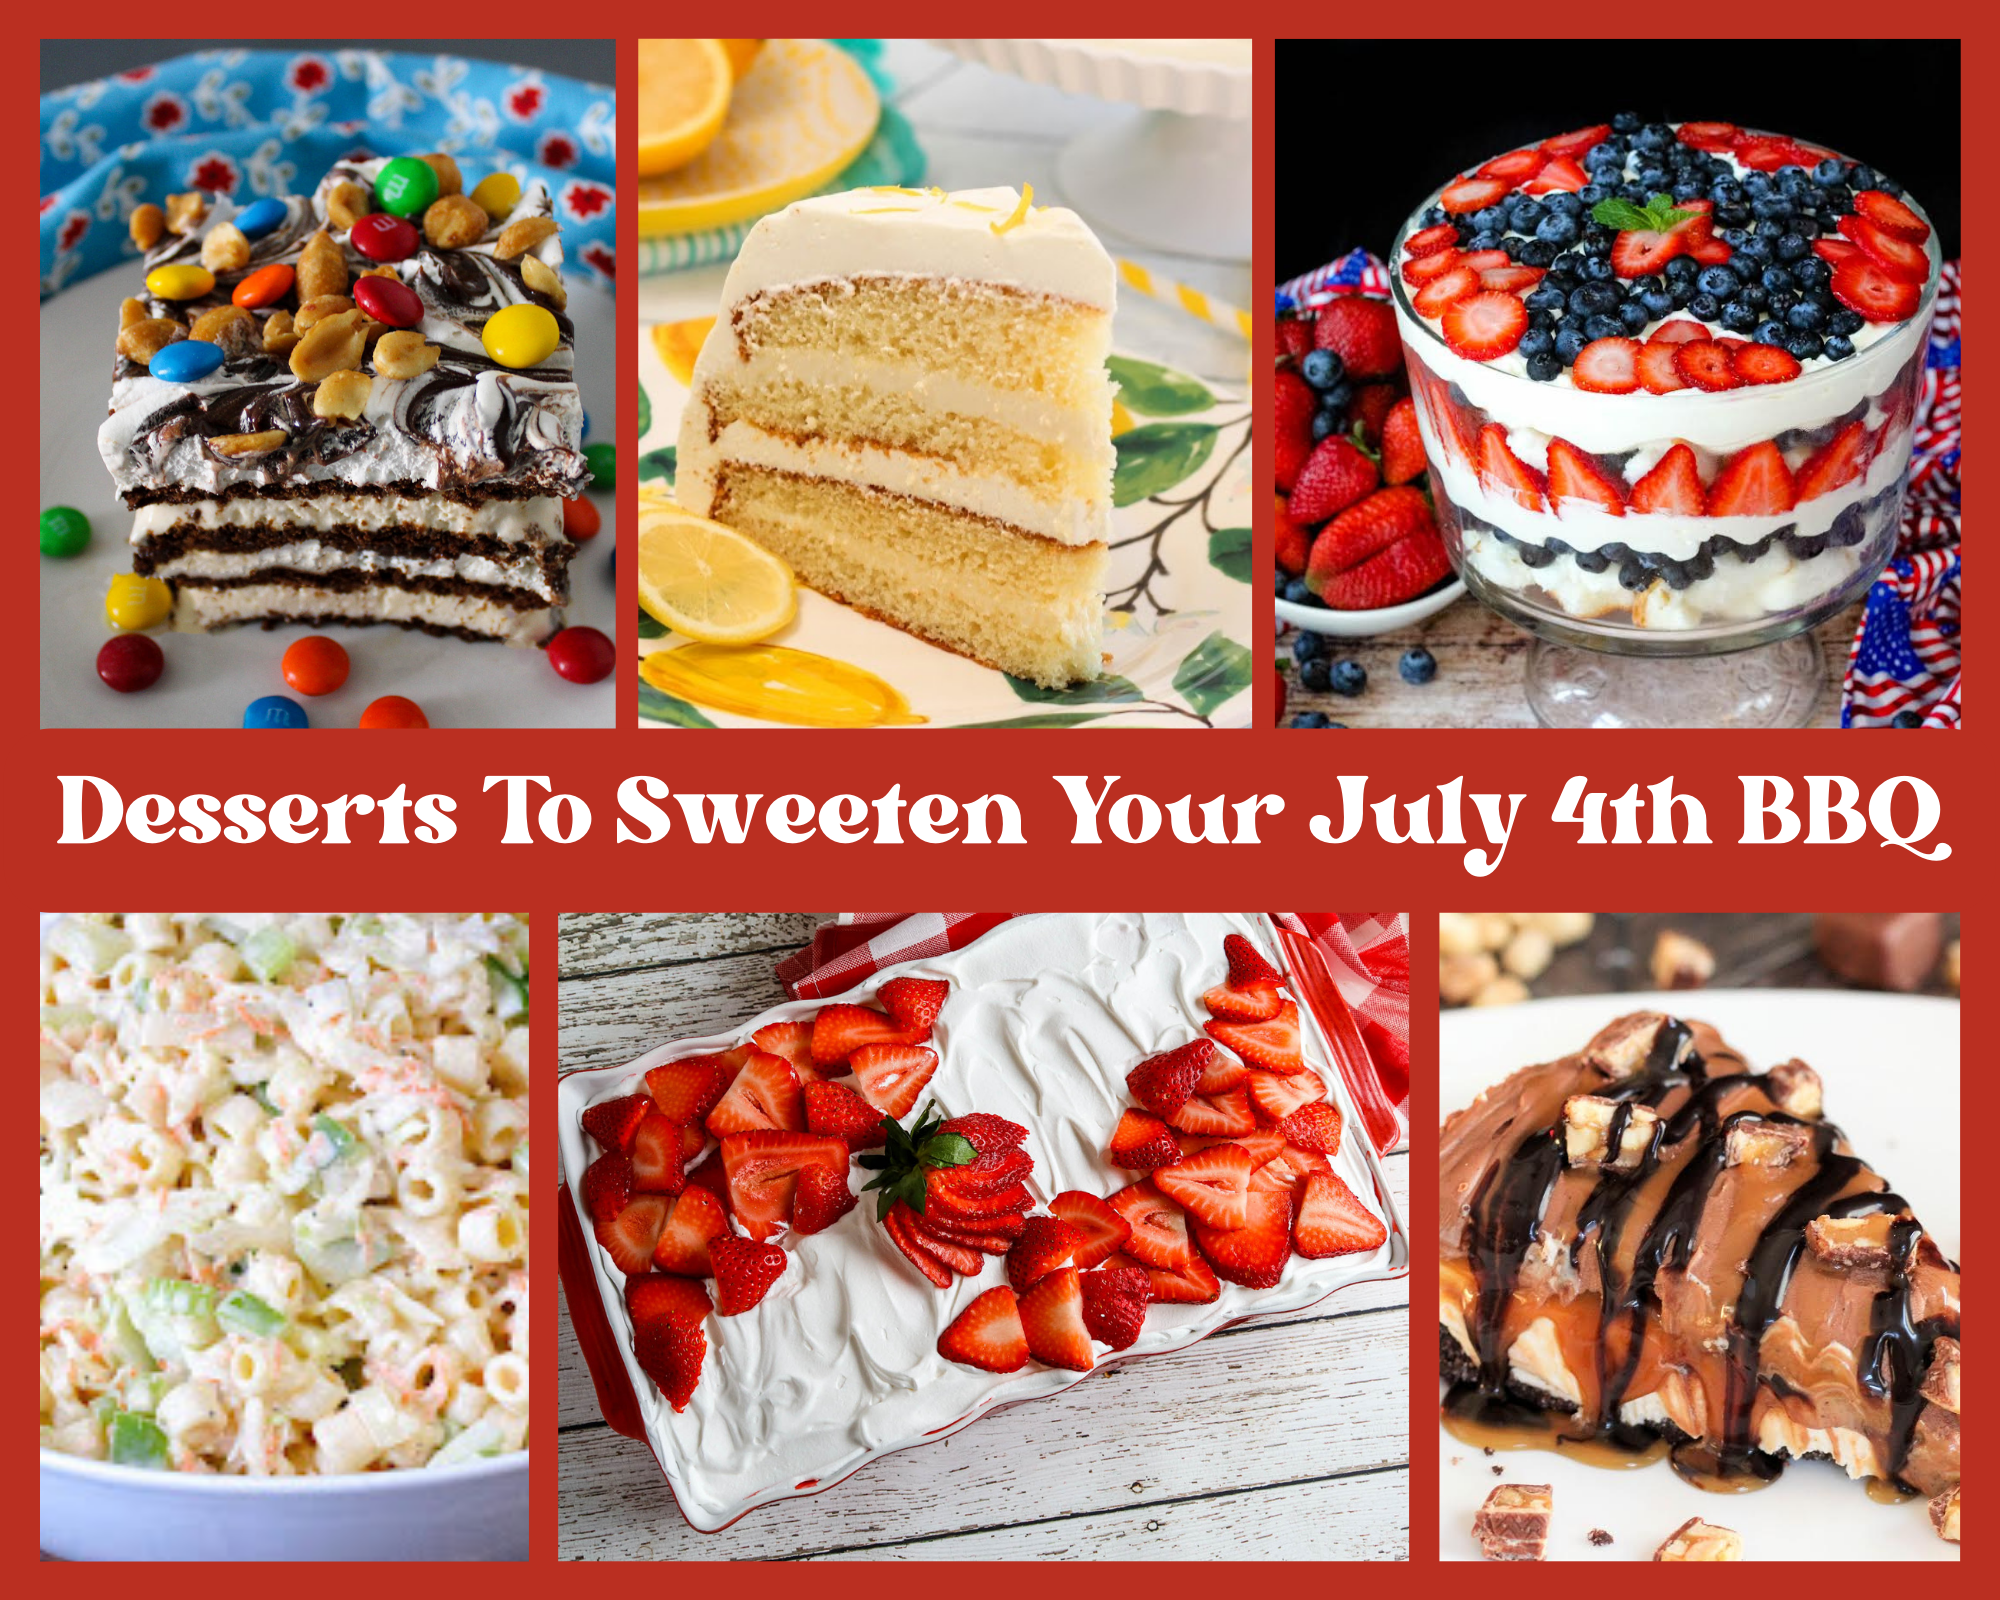 Desserts To Sweeten Your July 4th BBQ